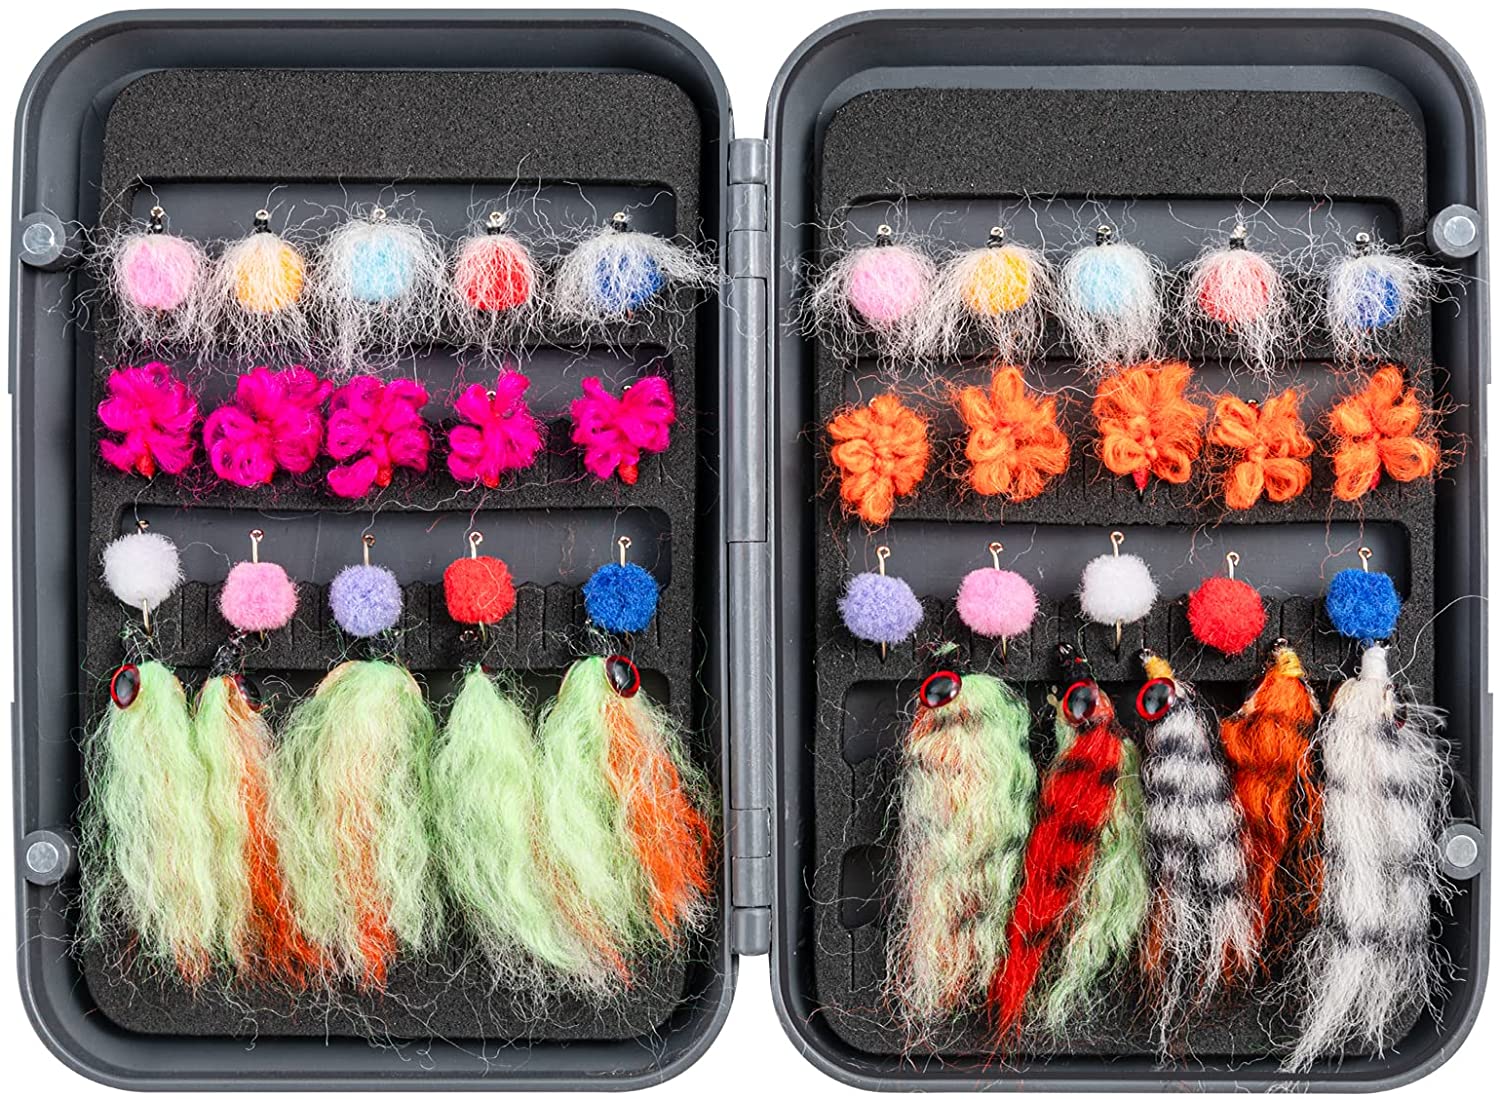 Pro Angler's Ultimate Fly Fishing Flies Kit - Premium Hand-Tied Lures for  Trout, Bass, Salmon, and More - 40PCS